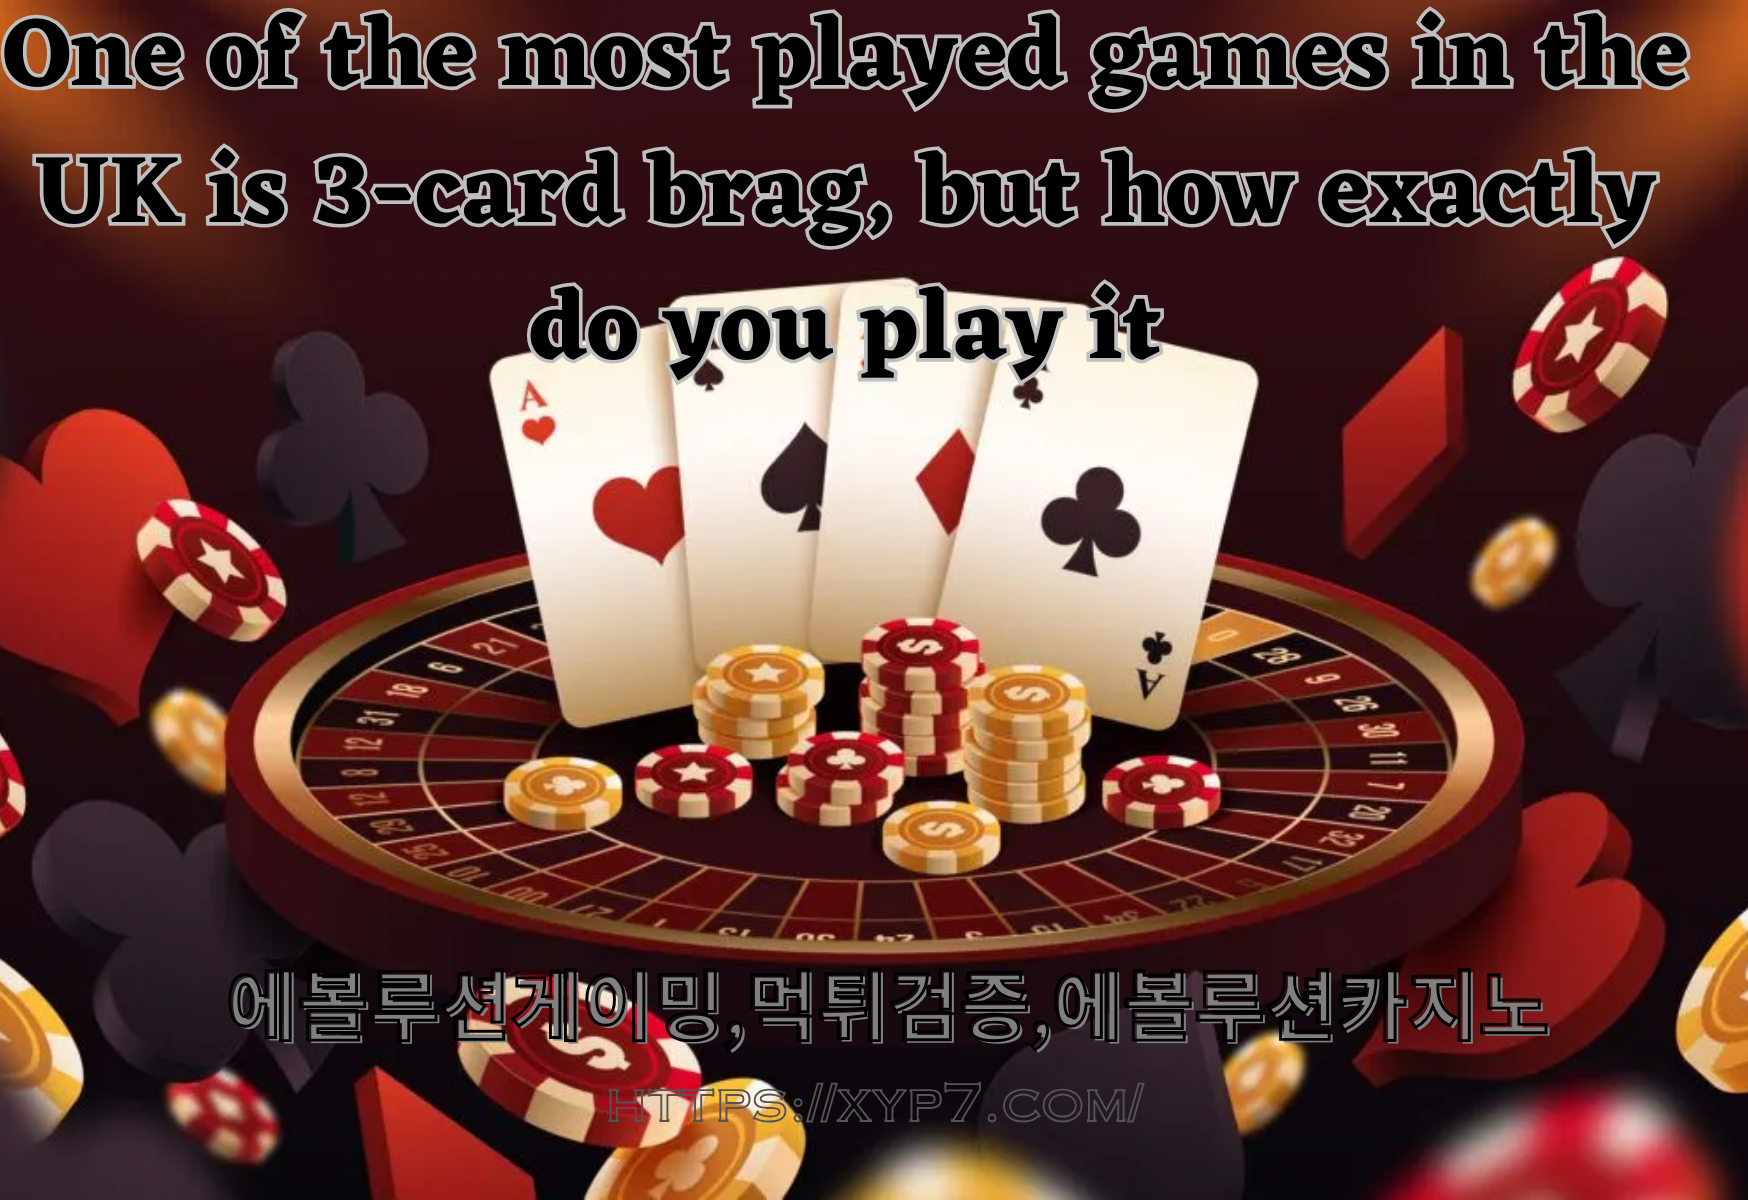 One of the most played games in the UK is 3-card brag, but how exactly do you play it?